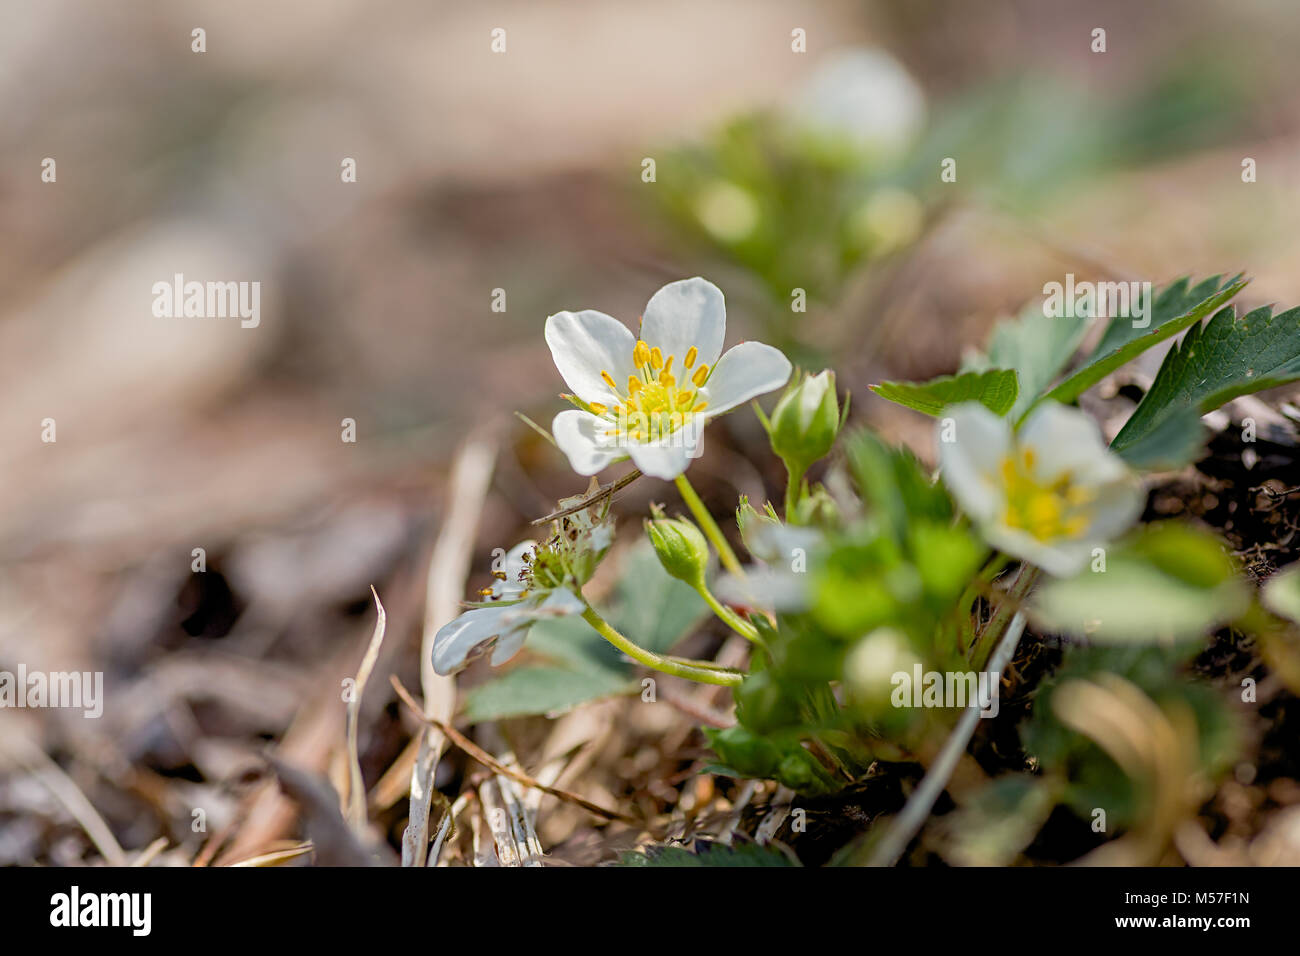 Wild strawberry plant flowering on the edge of the forest. Stock Photo